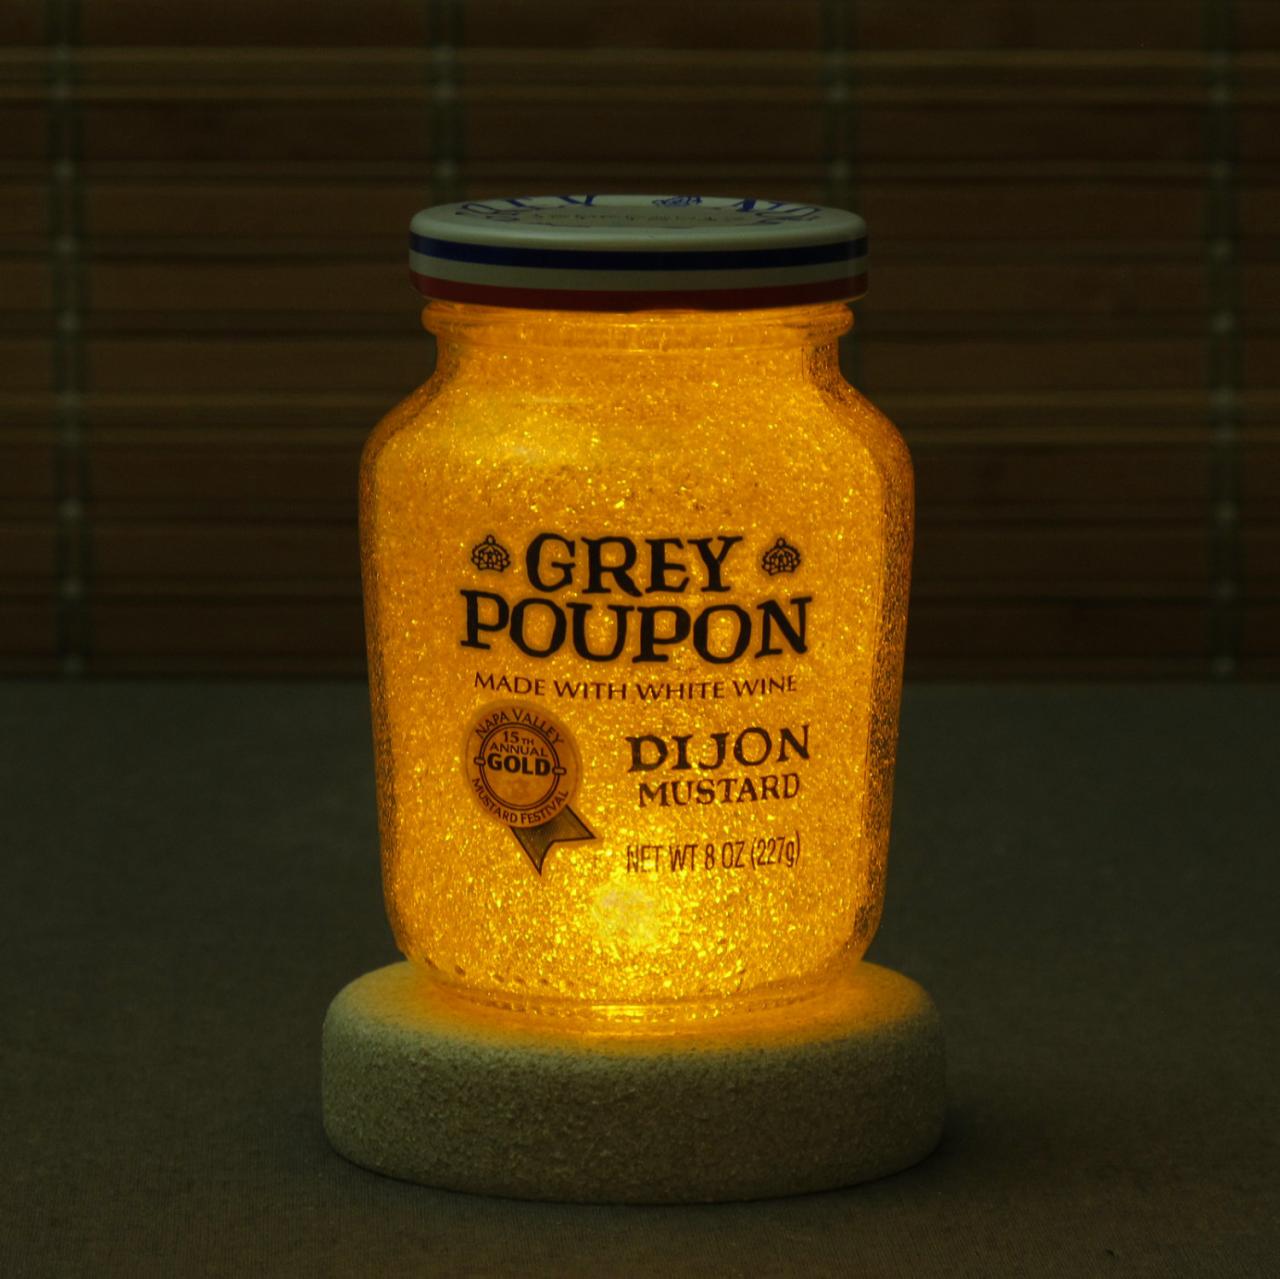 Grey Poupon Night Light Accent Lamp Corded With Switch Eco Led Diamond Like Glass Crystal Coating On Interior